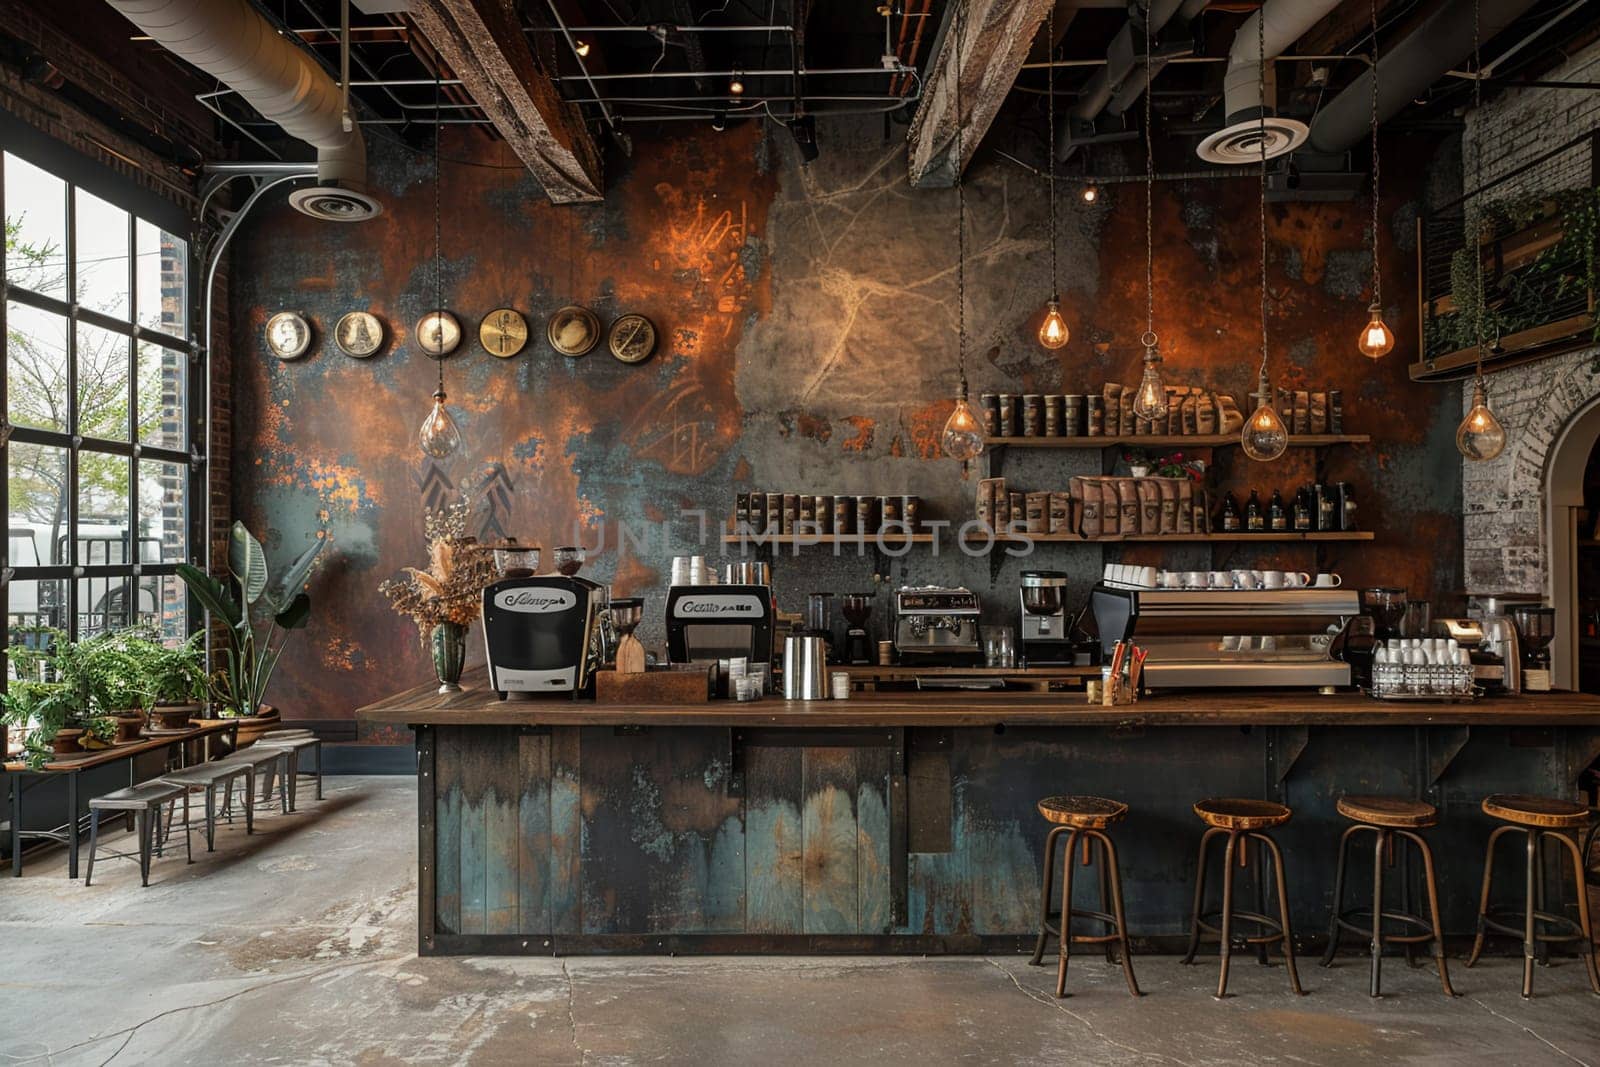 Industrial chic coffee shop with metal accents and communal seating